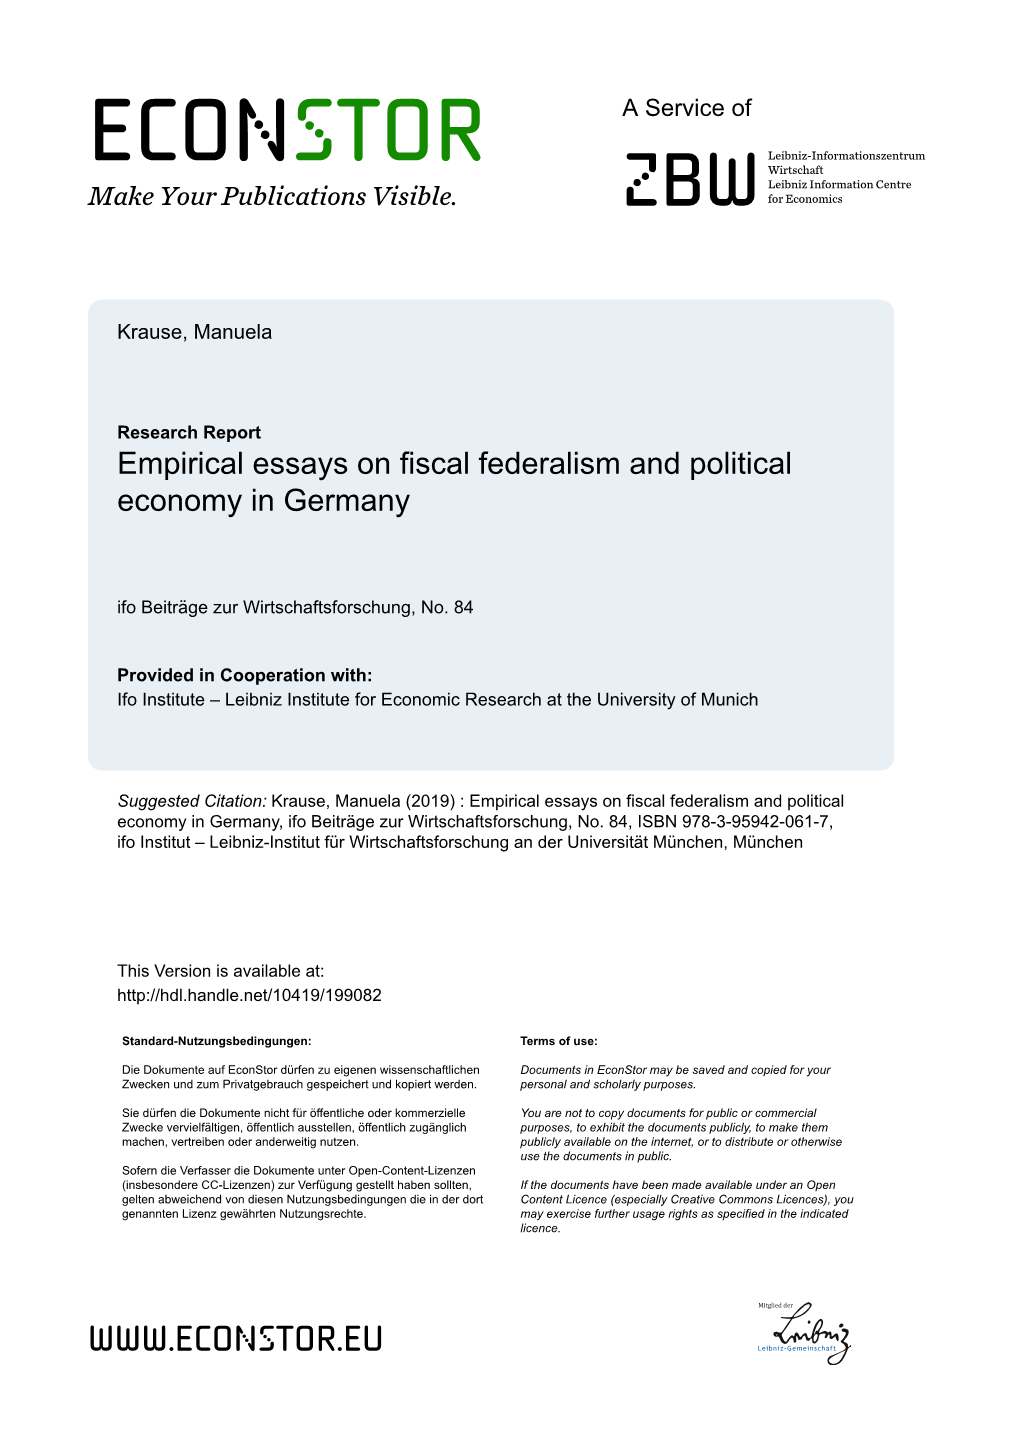 Empirical Essays on Fiscal Federalism and Political Economy in Germany